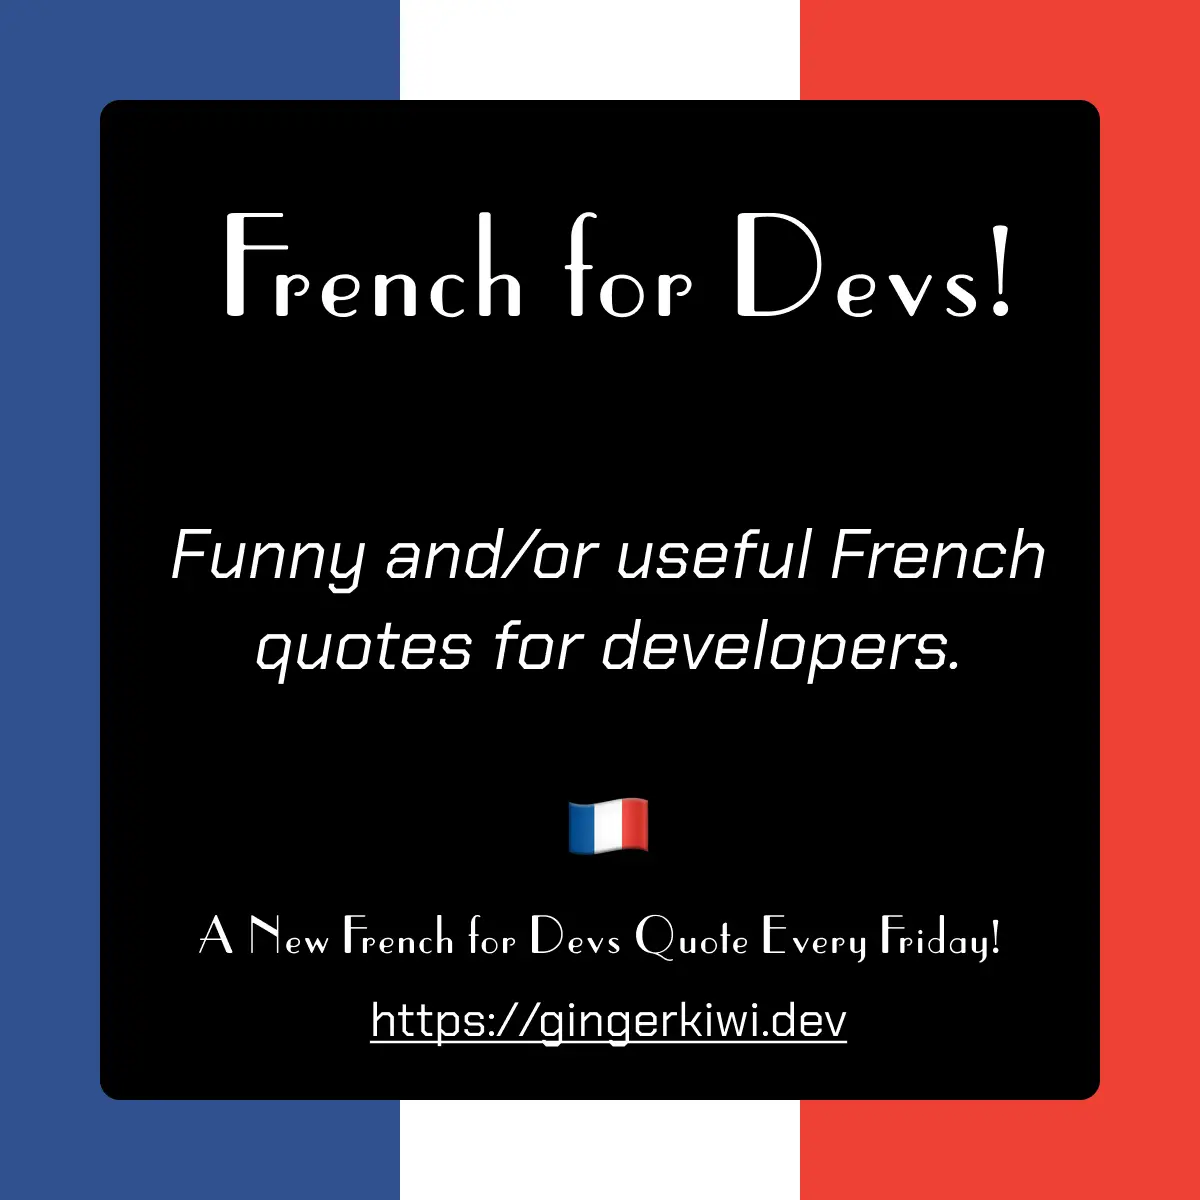 'White text on black background on top of a French Flag. Text says French for Devs! Funny and/or useful French quotes for developers. A New French for Devs Quote Every Friday! https://gingerkiwi.dev'